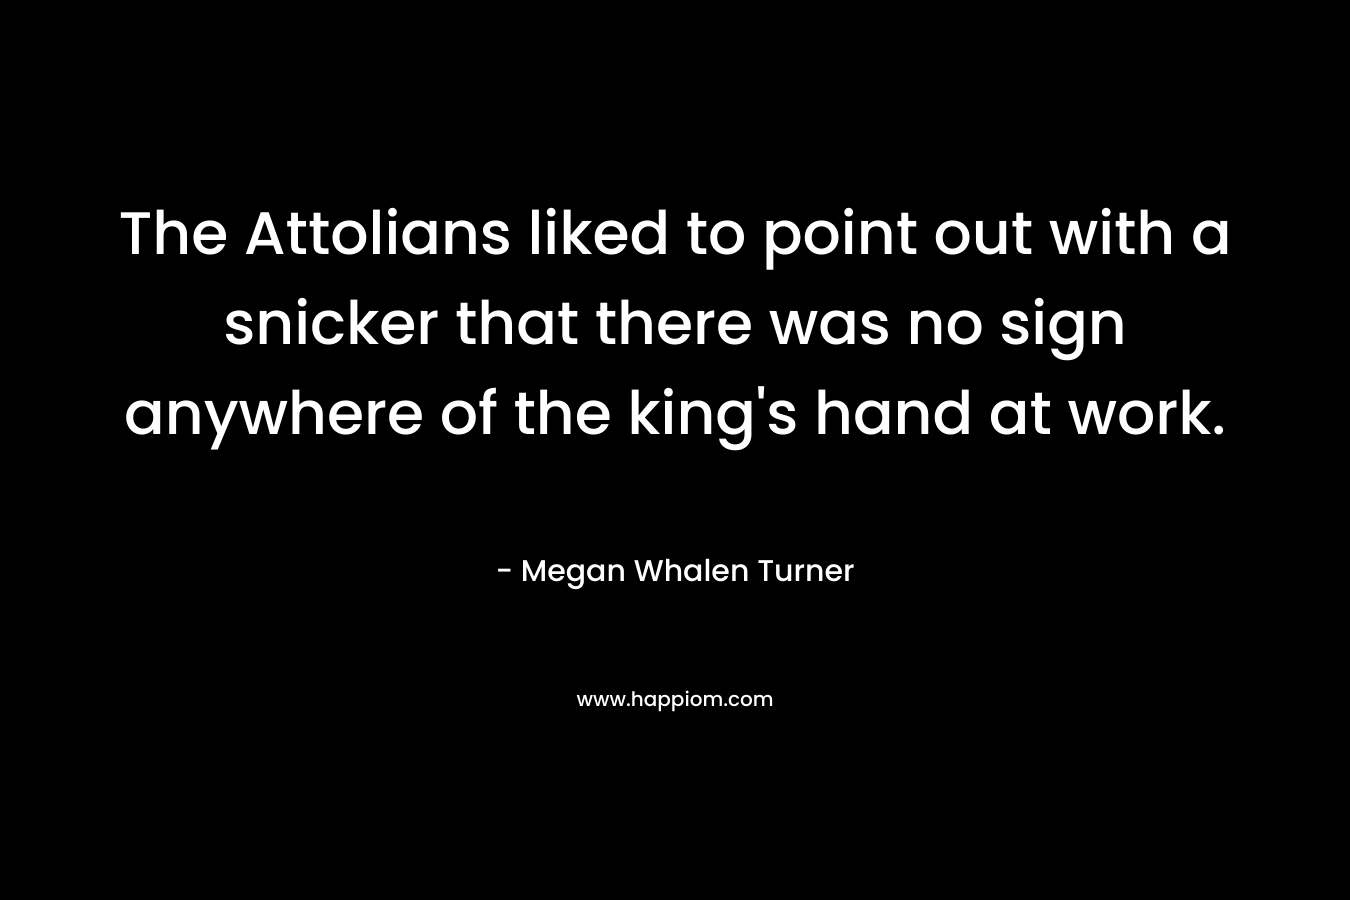 The Attolians liked to point out with a snicker that there was no sign anywhere of the king's hand at work.